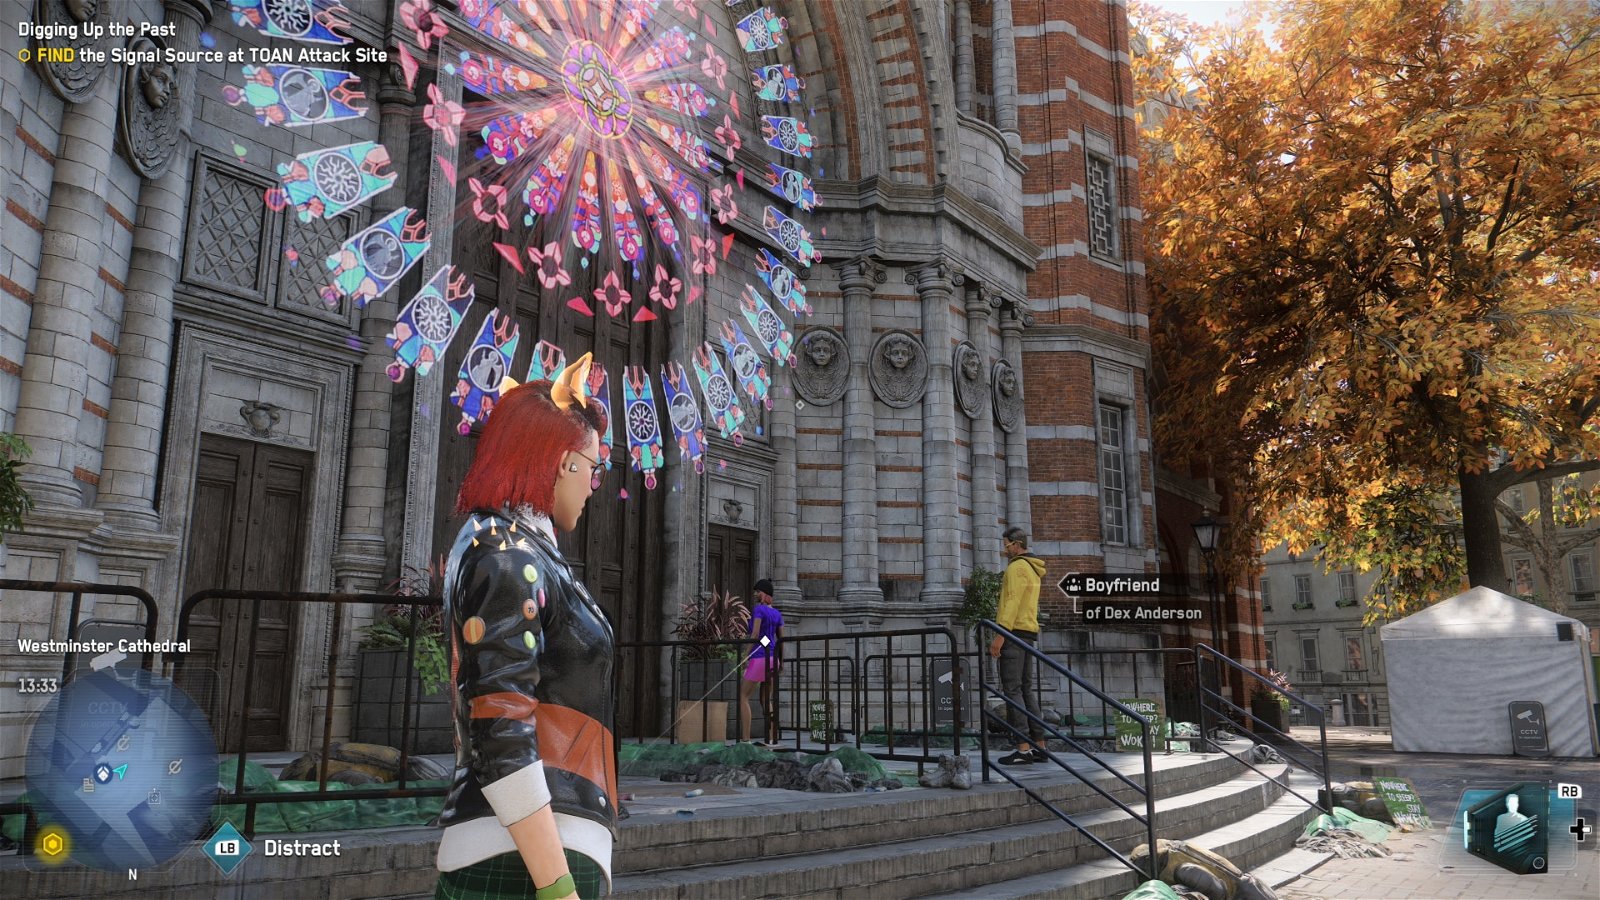 Watch Dogs Legion Full Review - Gideon's Gaming